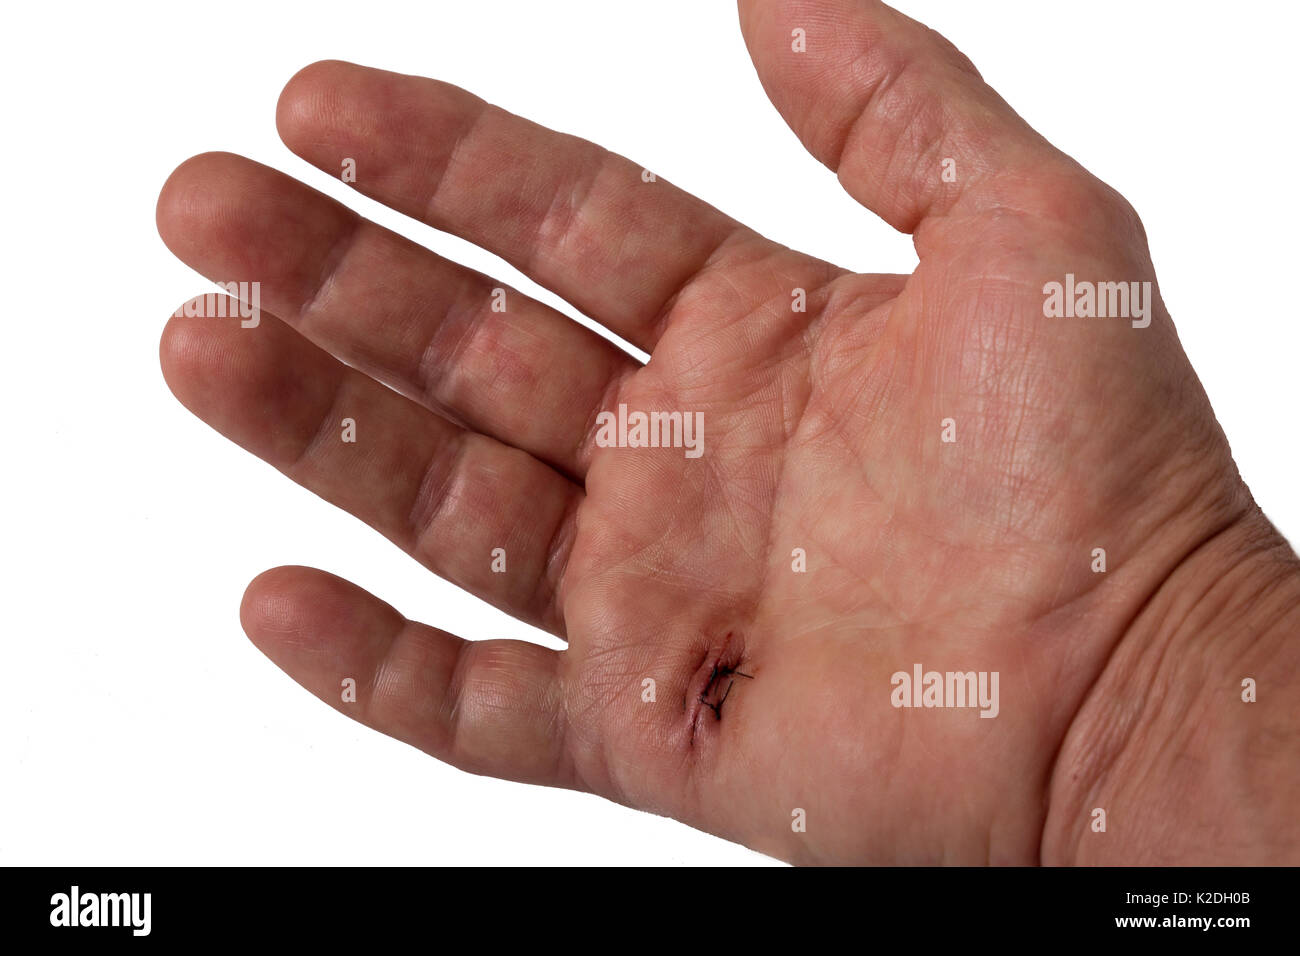 A hand with stitches Stock Photo